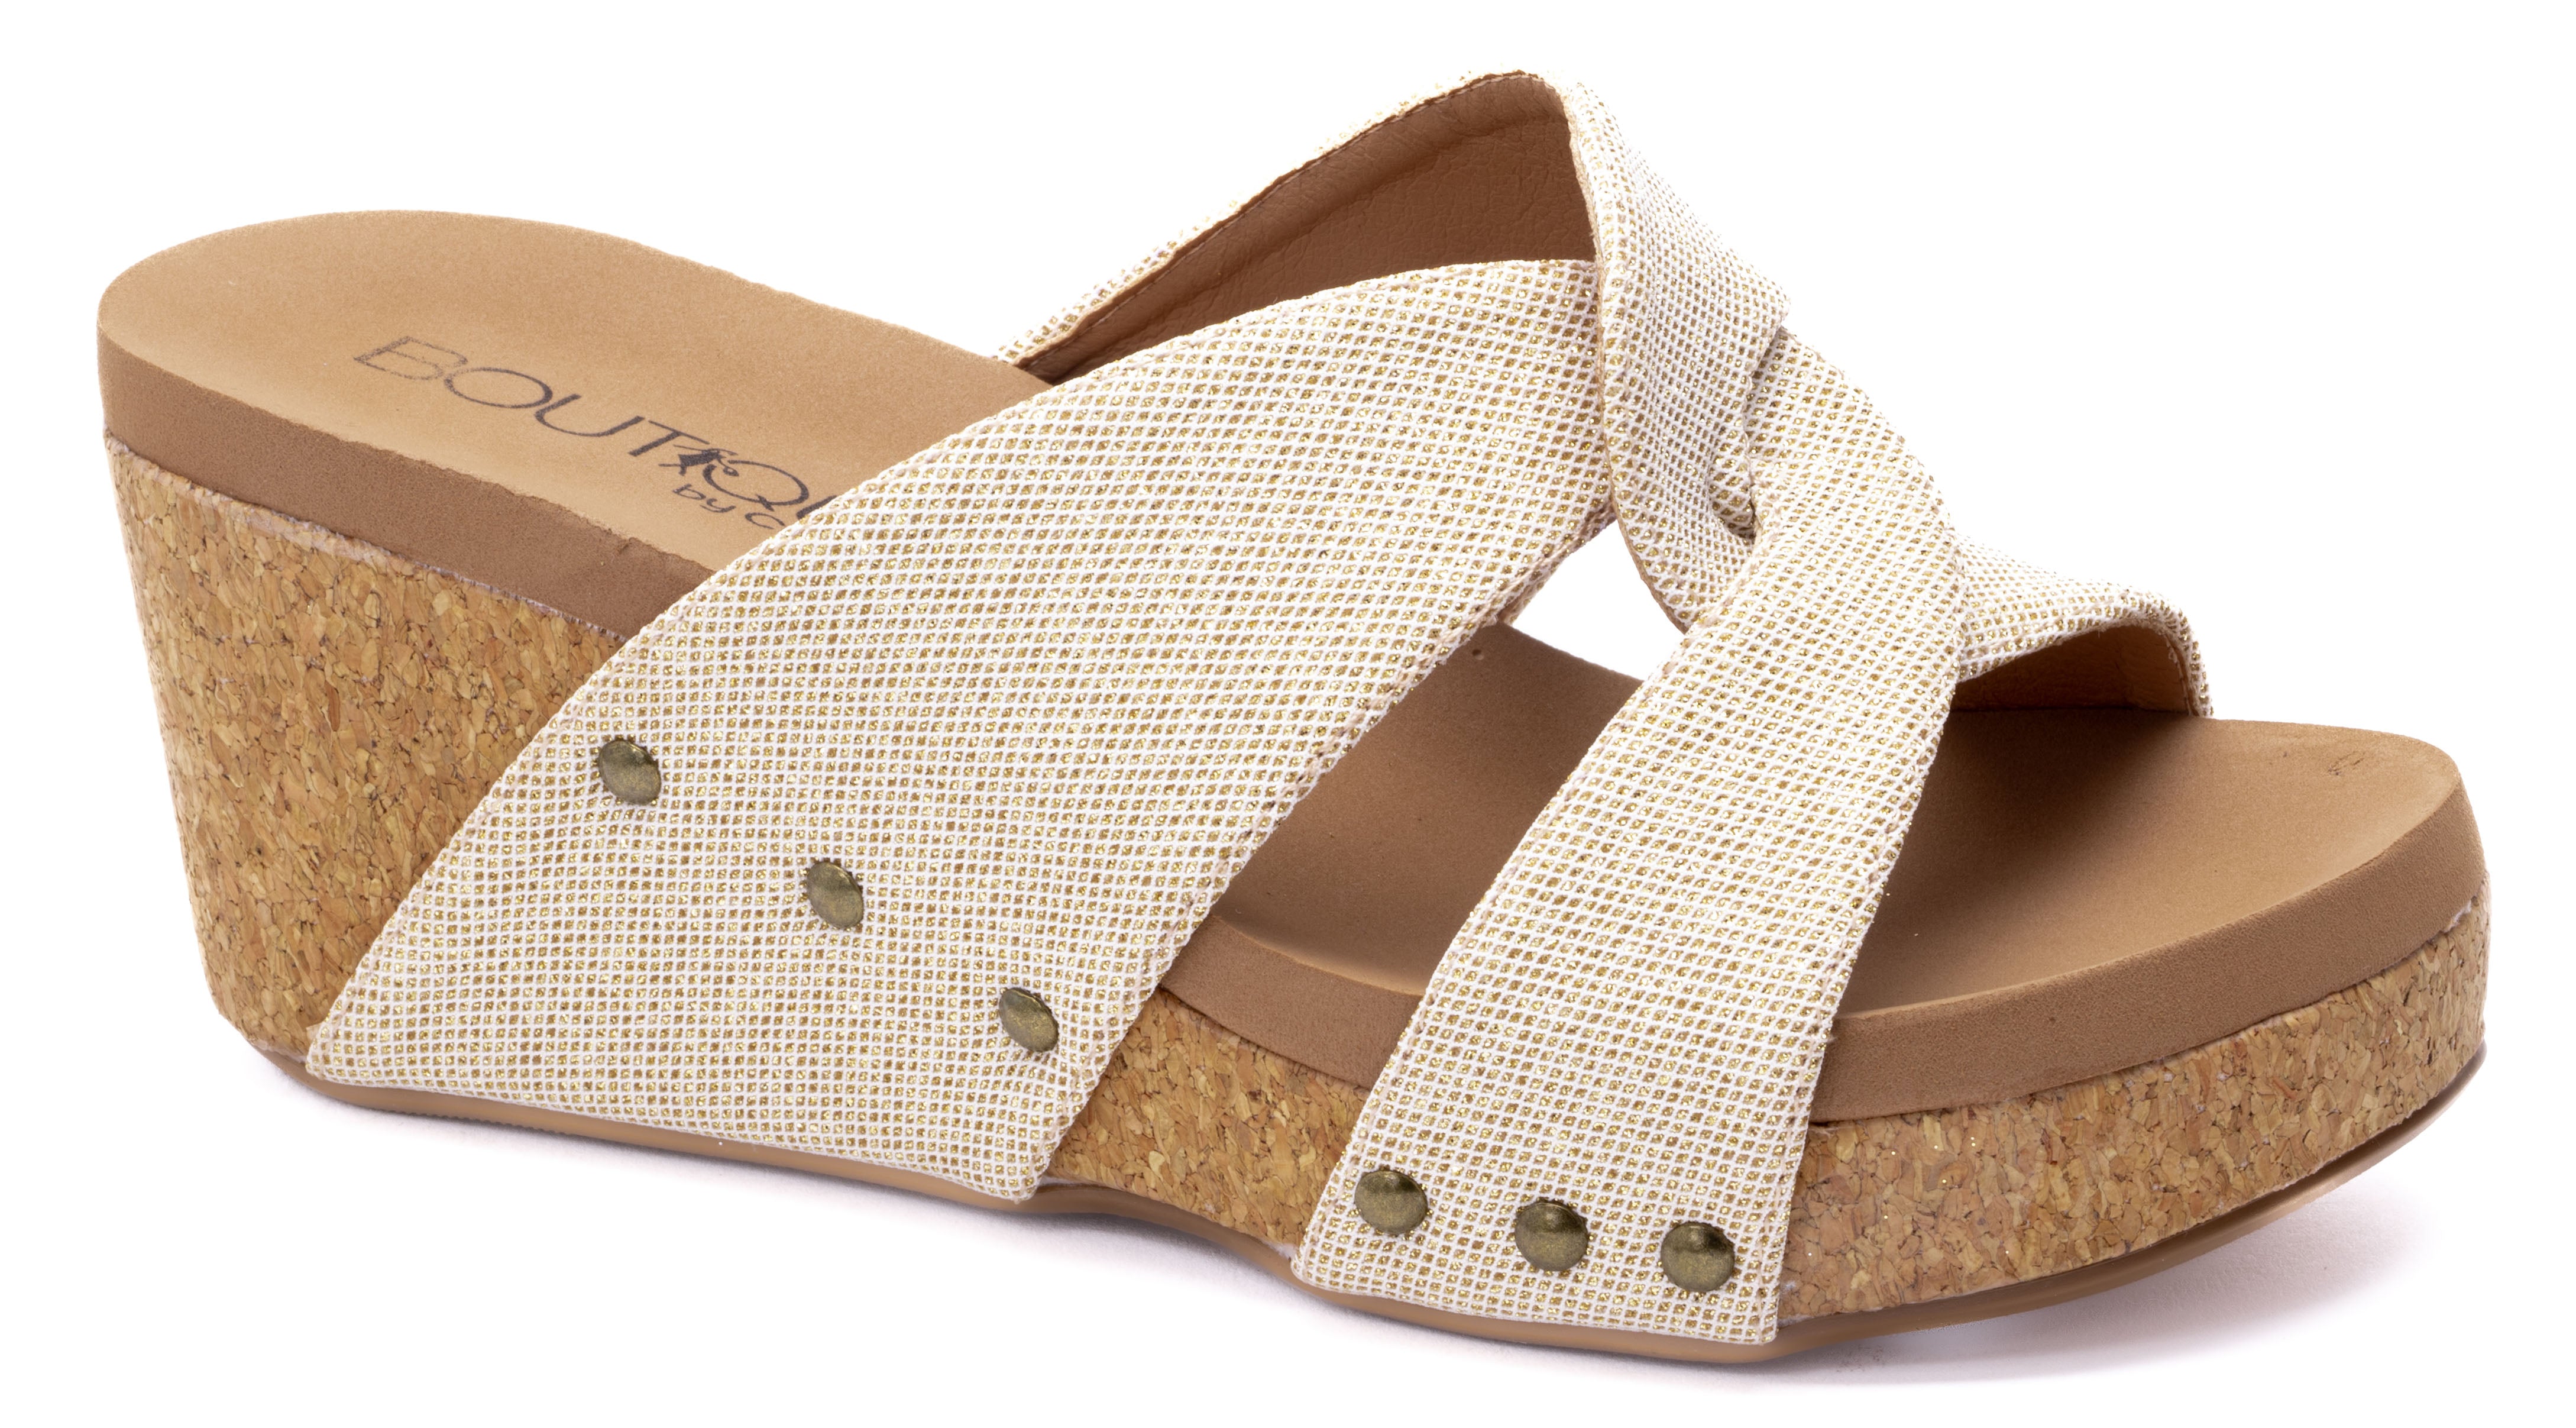 Market Live Preorder: Bonny Wedge by Corky’s (Ships in 2-3 Weeks)